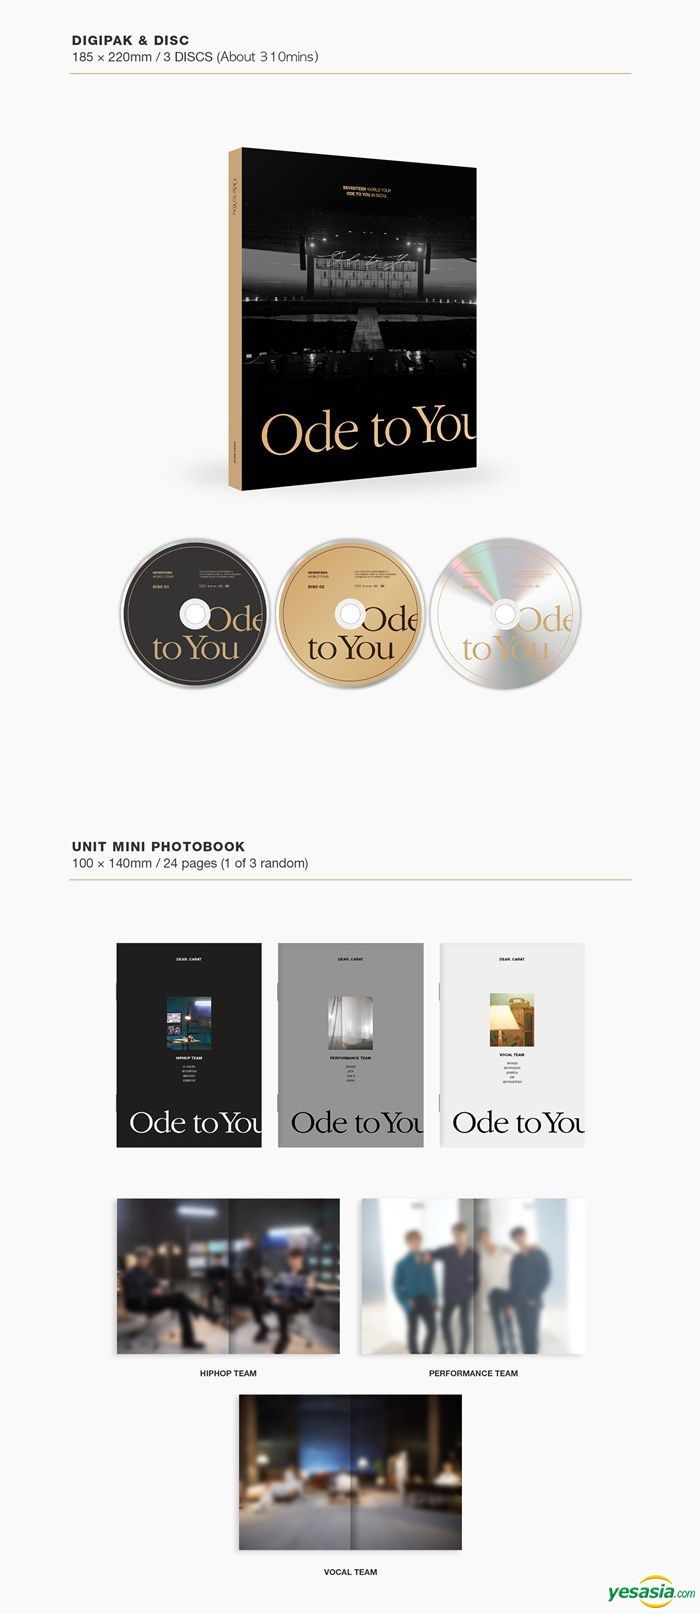 YESASIA: Seventeen World Tour 'Ode To You' in Seoul (3DVD + 